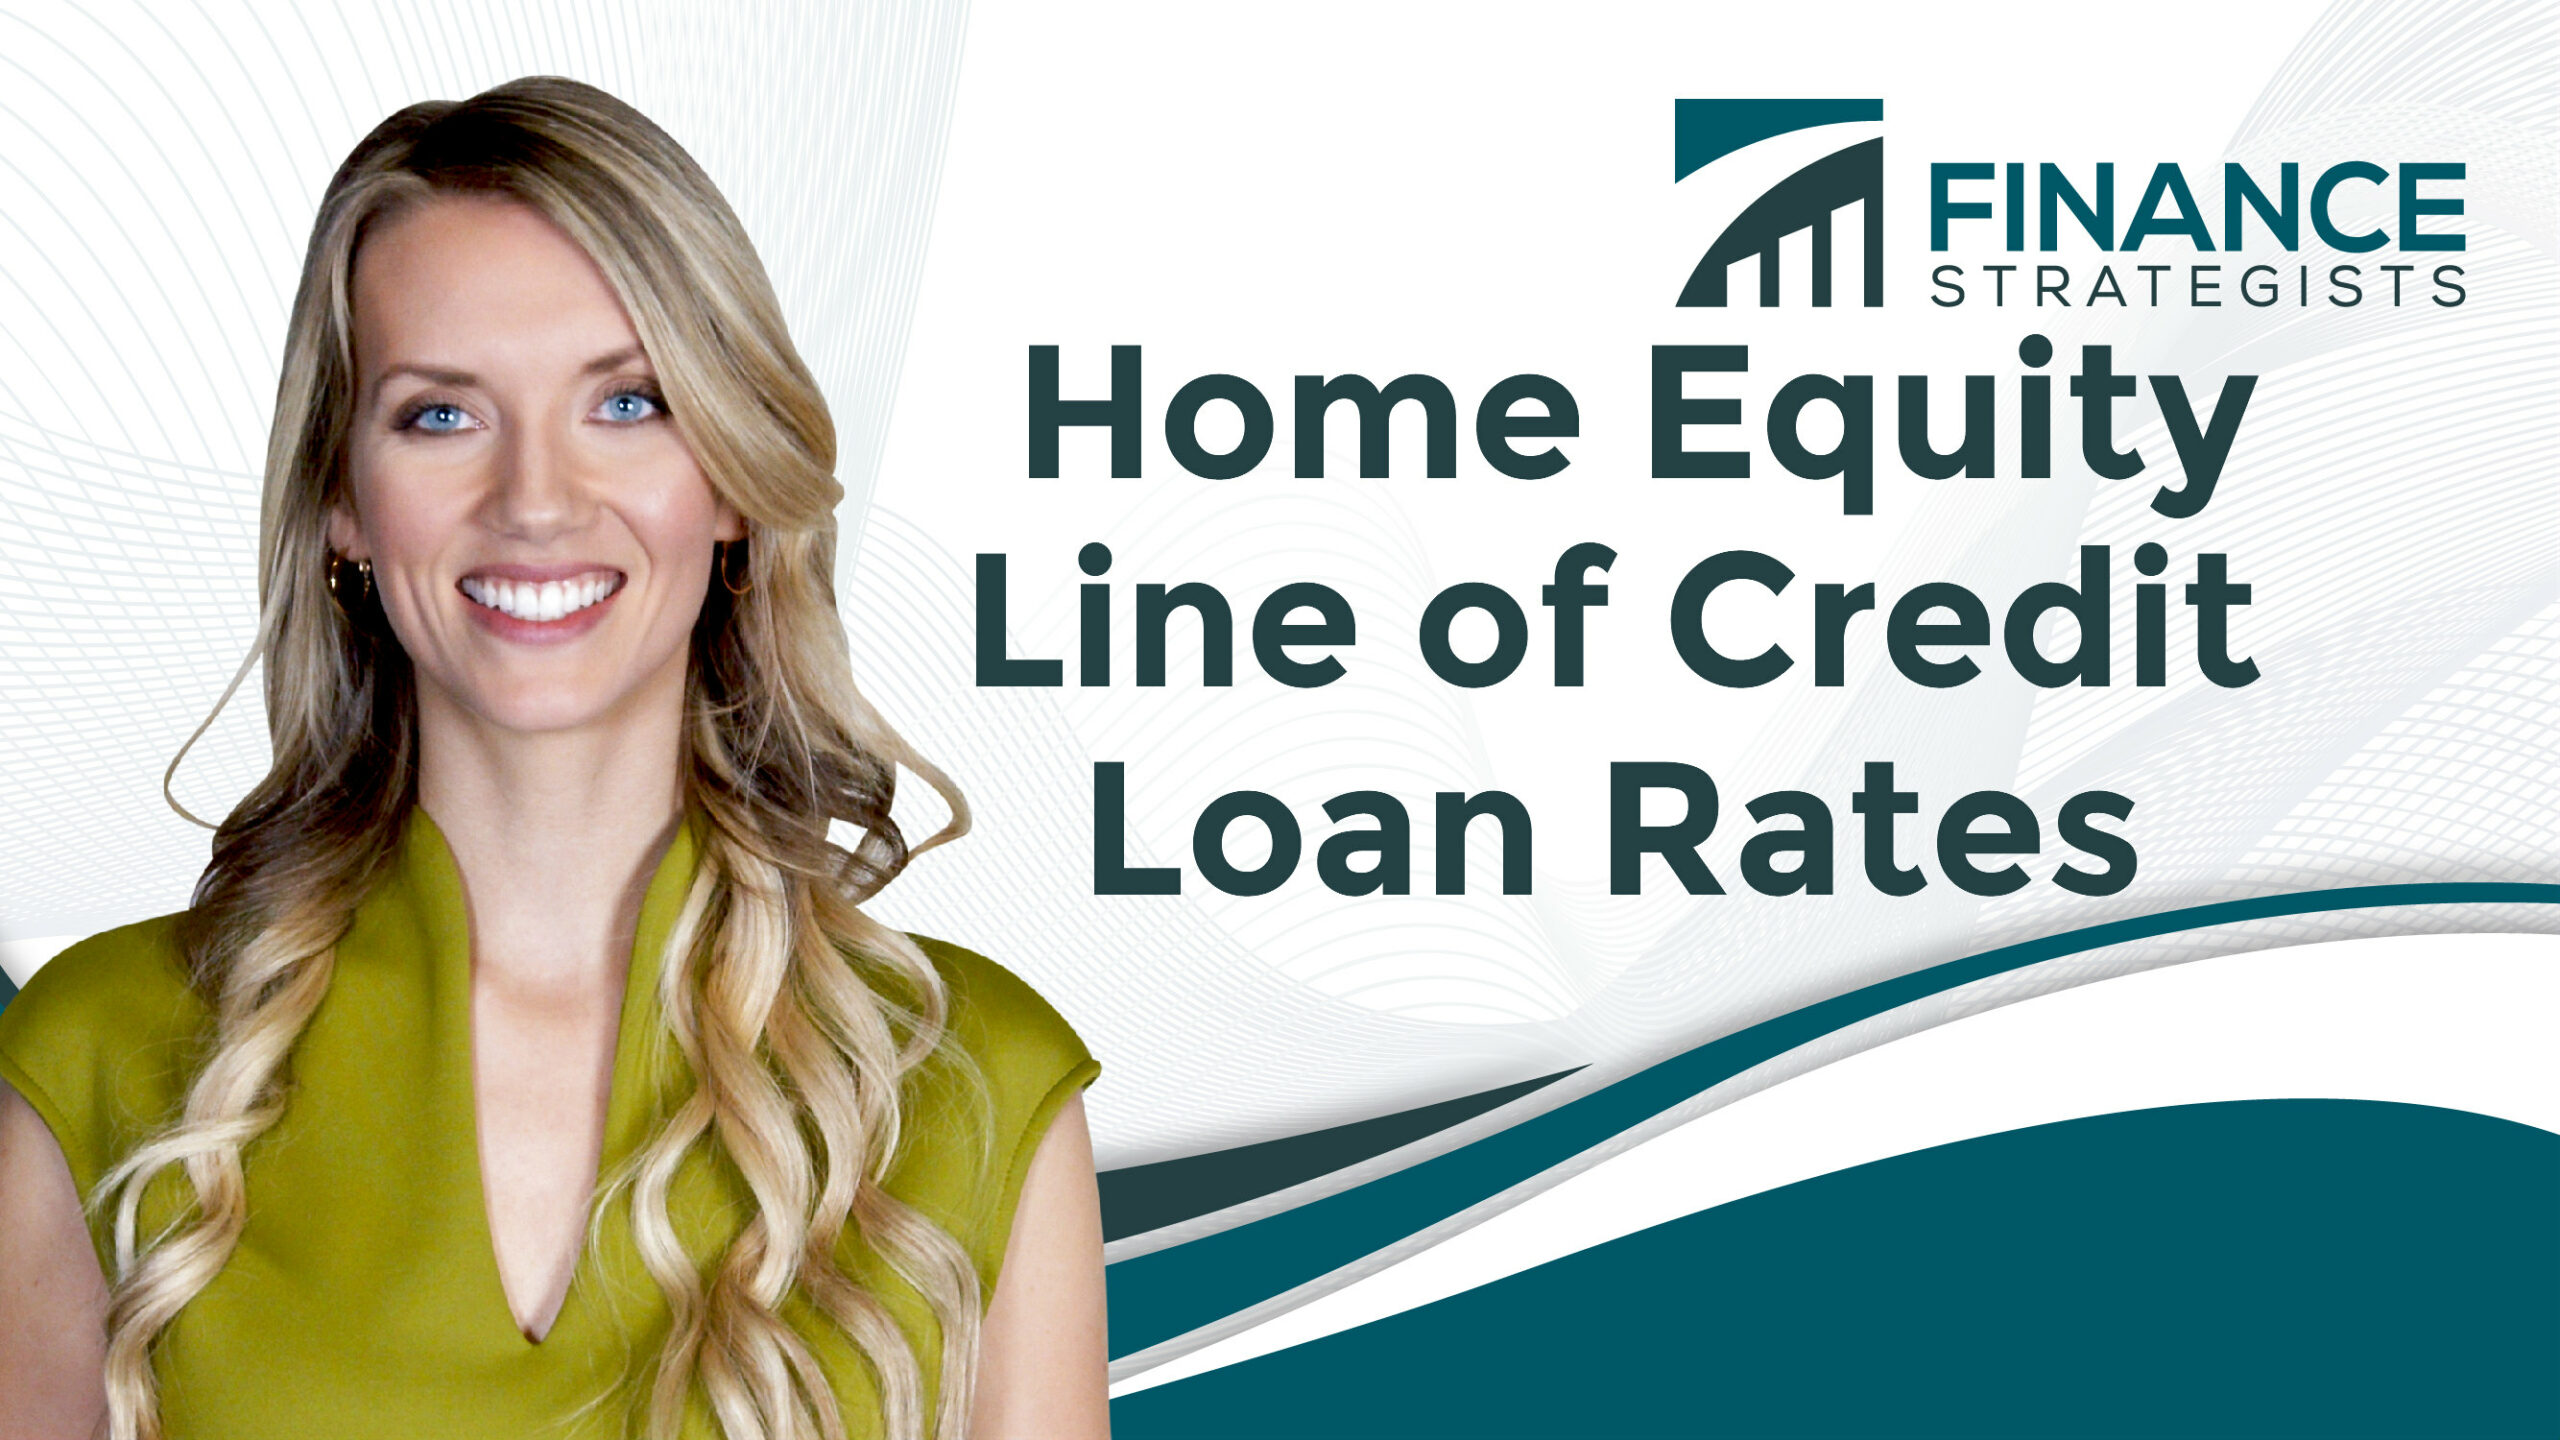 Home Equity Line of Credit Loan Rates | Finance Strategists